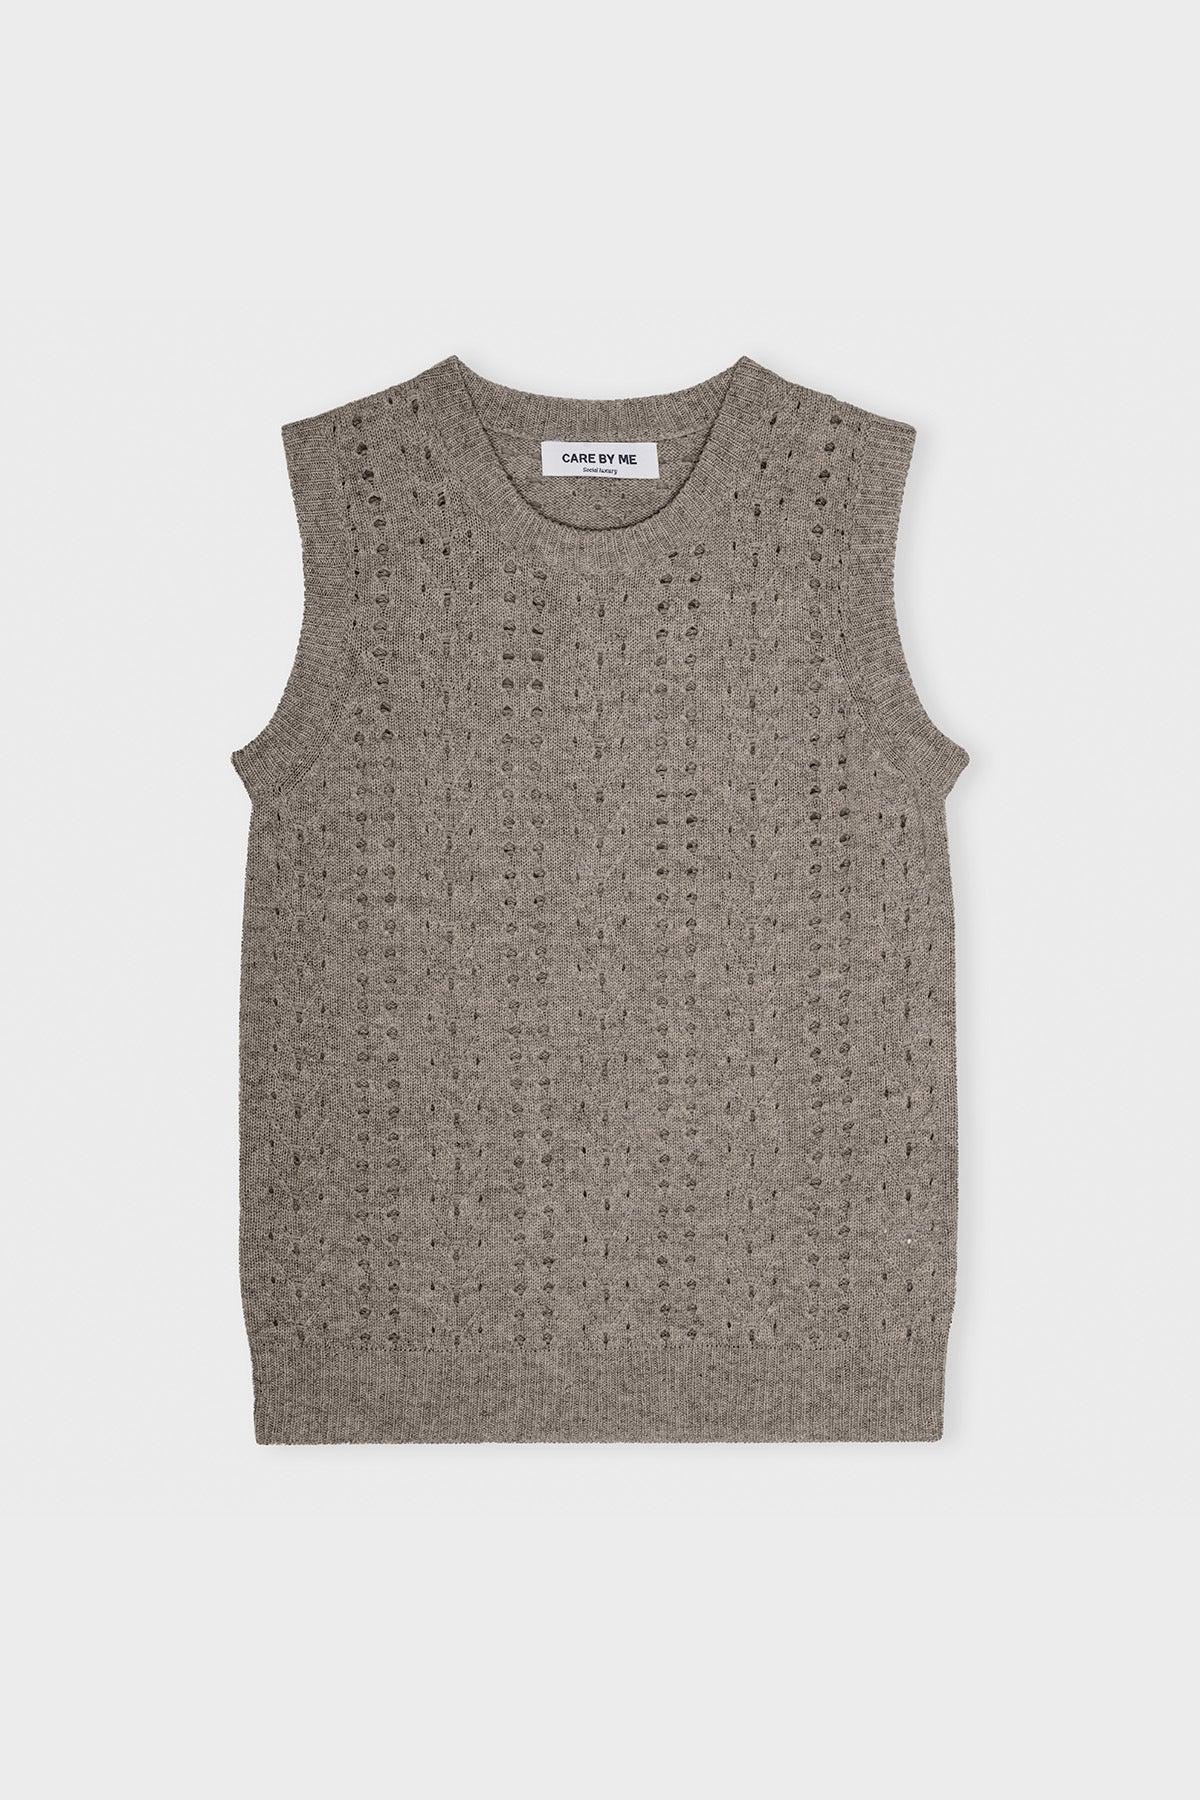 CARE BY ME 100% Cashmere Womens Maria Vest